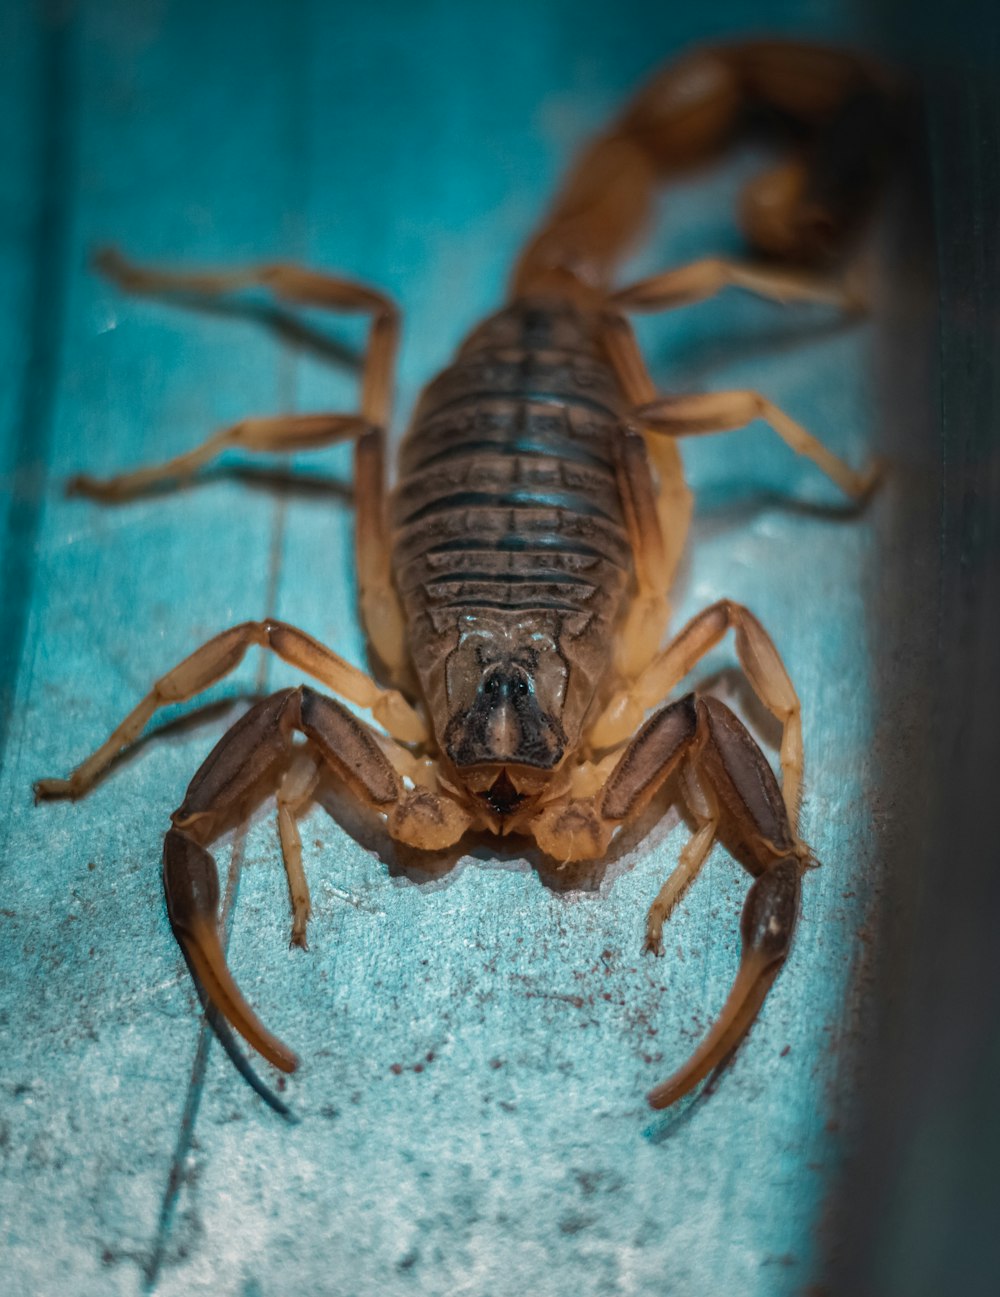 a close up of a scorpion on a blue surface